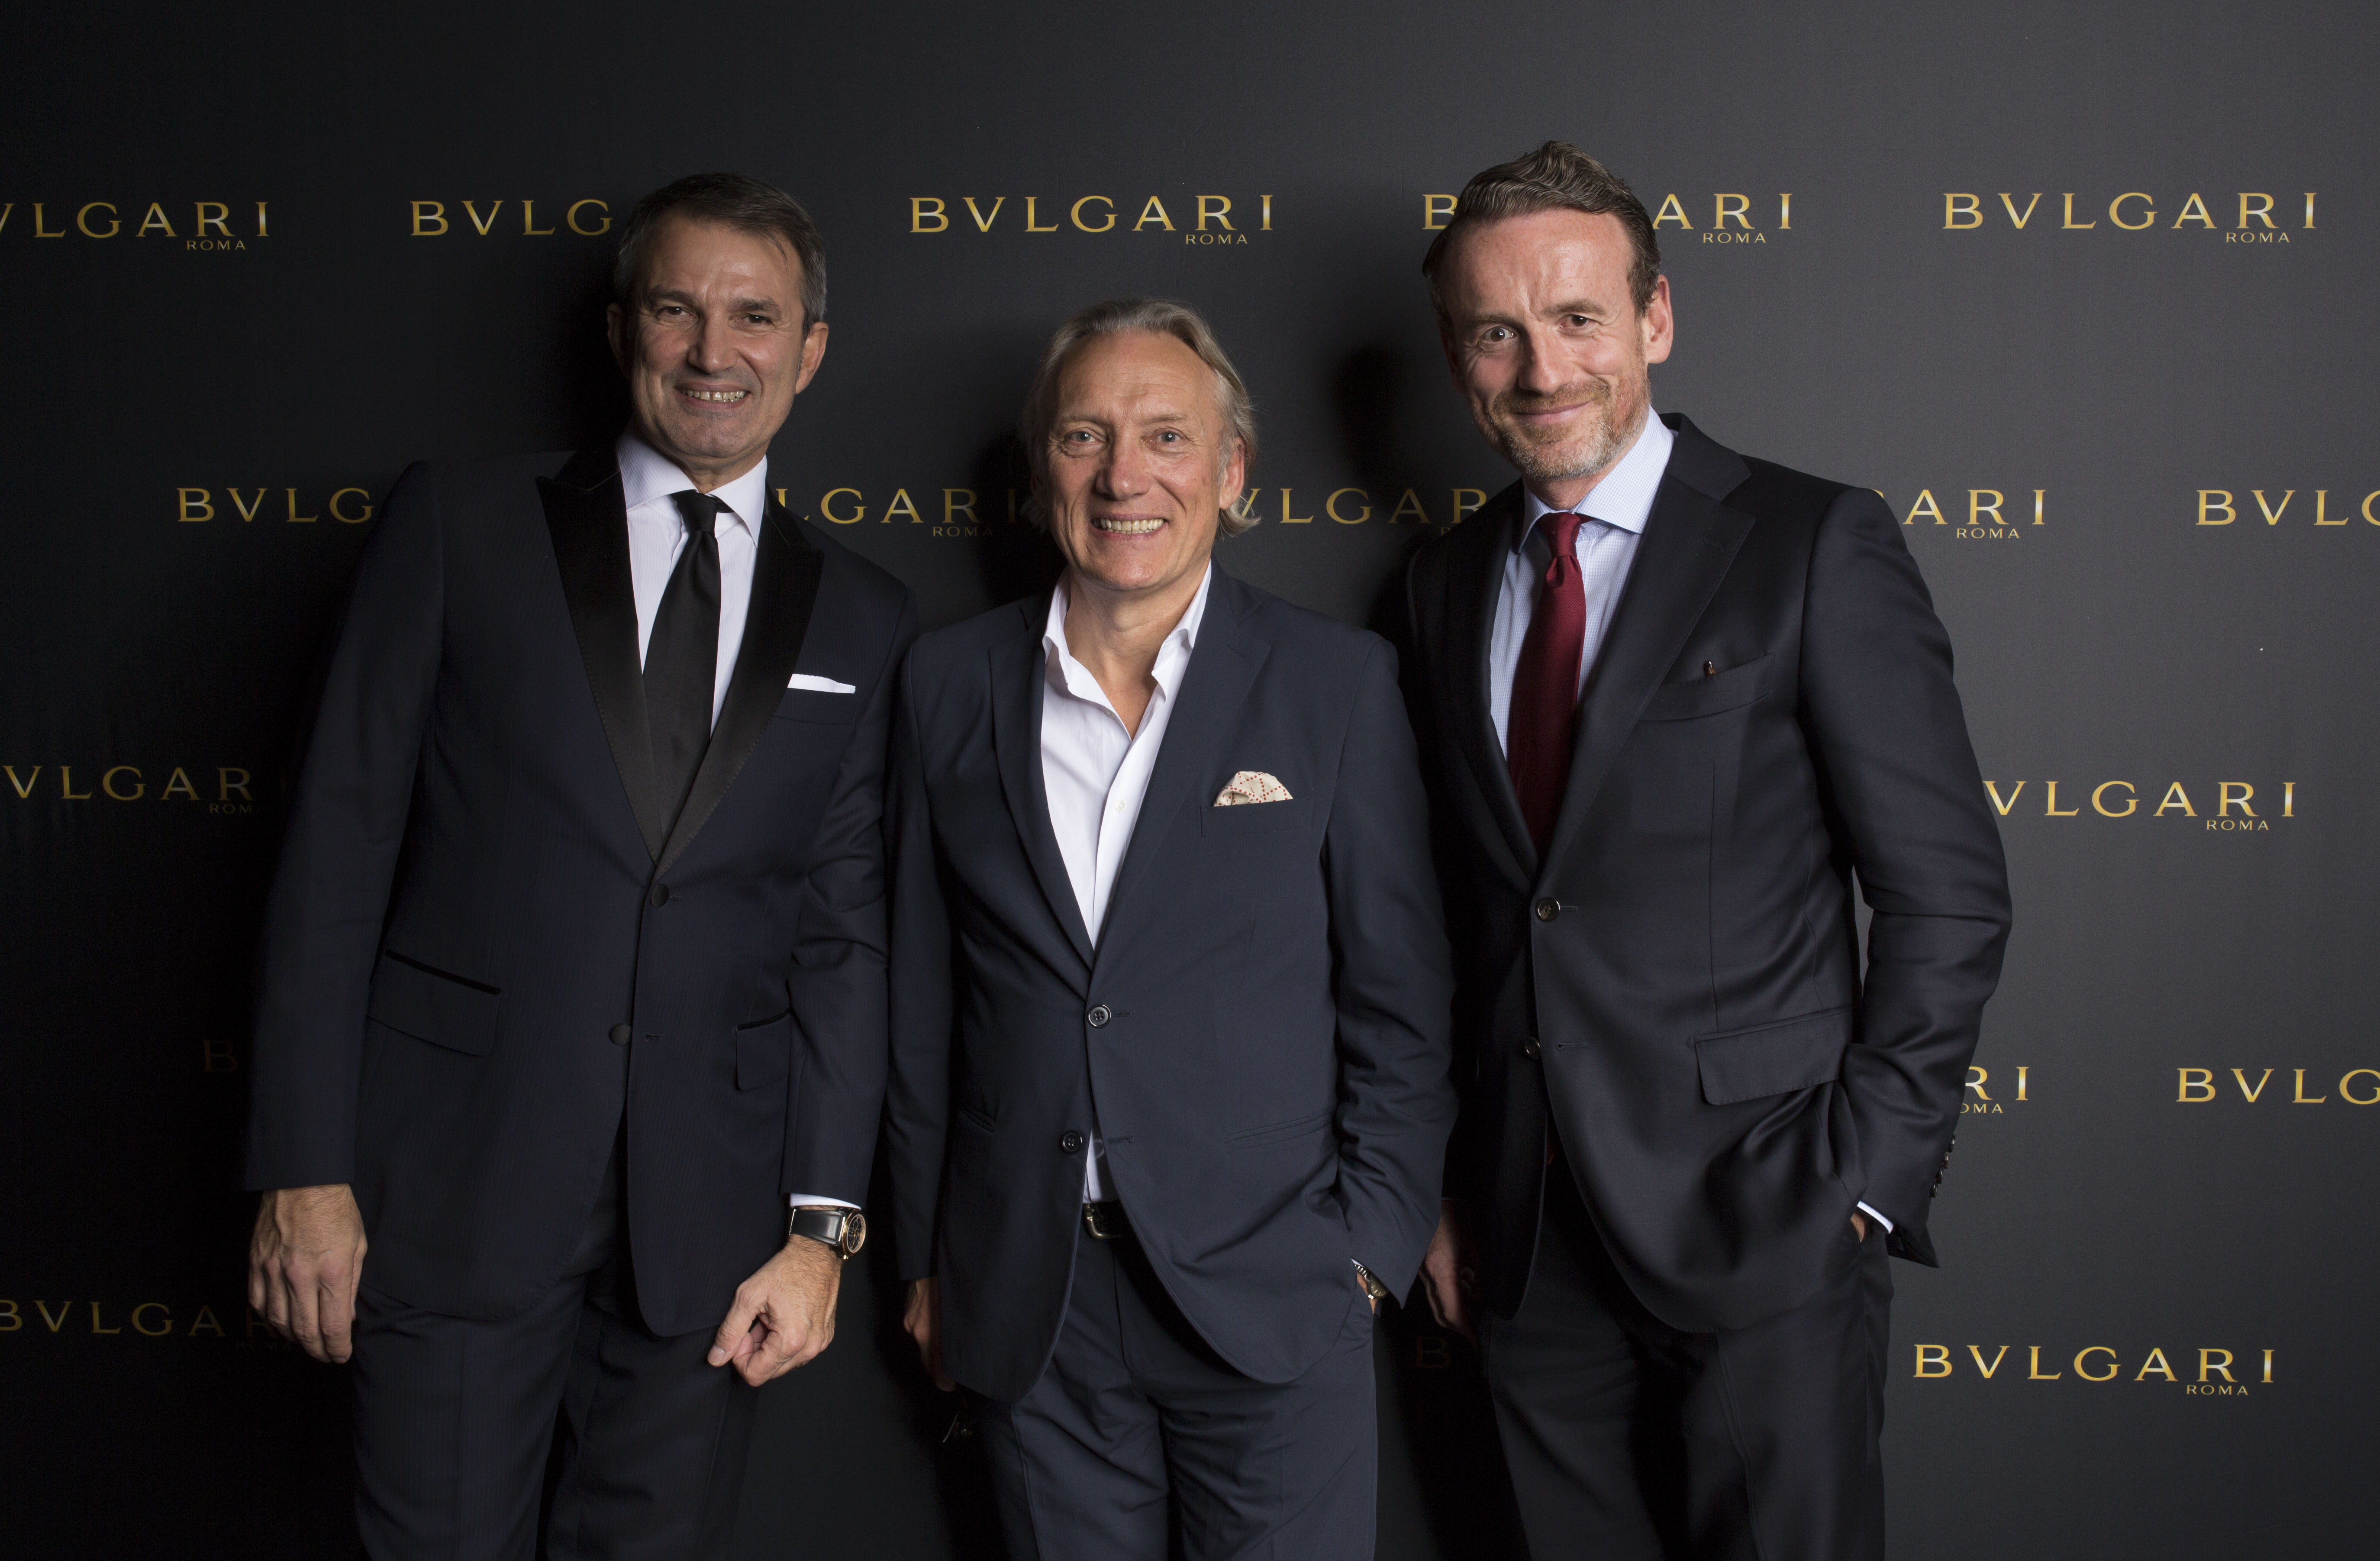 AMSTERDAM, NETHERLANDS - NOVEMBER 2: (L-R) Lelio Gavazza, Willem van Gogh and Axel Ruege attend Bulgari facilitating homecoming of long lost van Gogh masterpieces at the Van Gogh Museum on November 2, 2017 in Amsterdam Netherlands. (Photo by Serge Ligtenberg/Getty Images for Bulgari) *** Local Caption *** Lelio Gavazza; Willem van Gogh; Axel Ruege